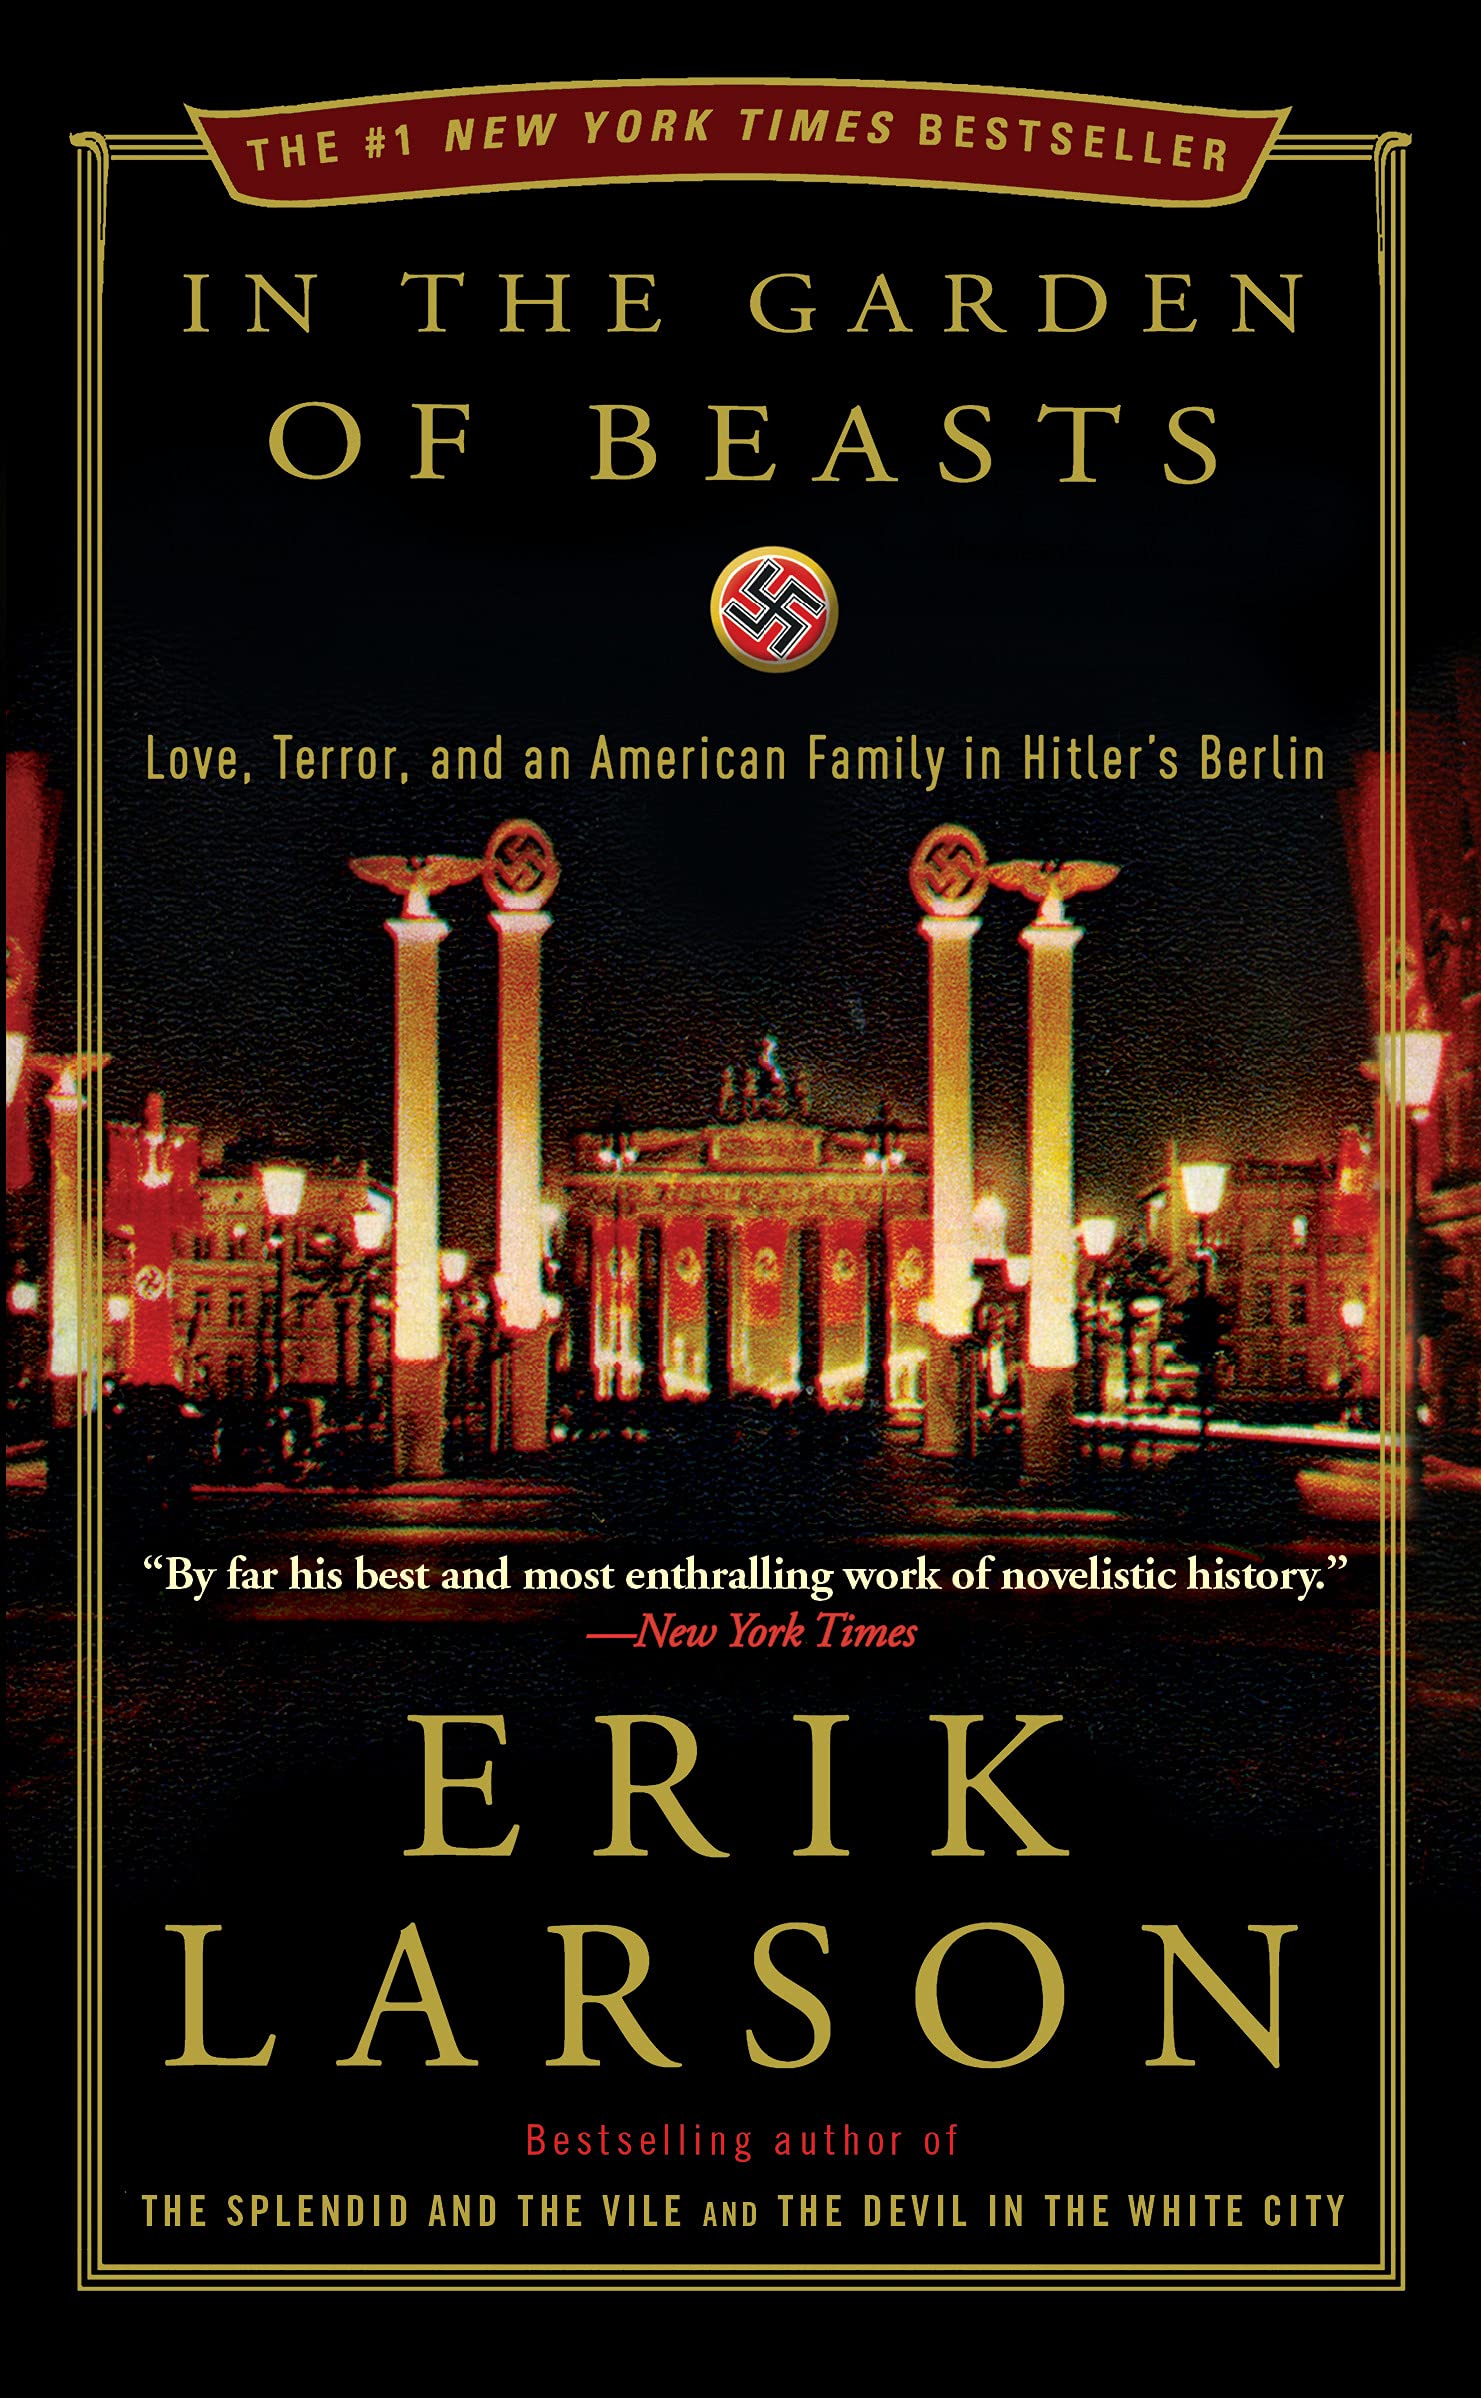 In the Garden of Beasts: Love, Terror, and an American Family in Hitler's Berlin (eBook) by Erik Larson $2.99